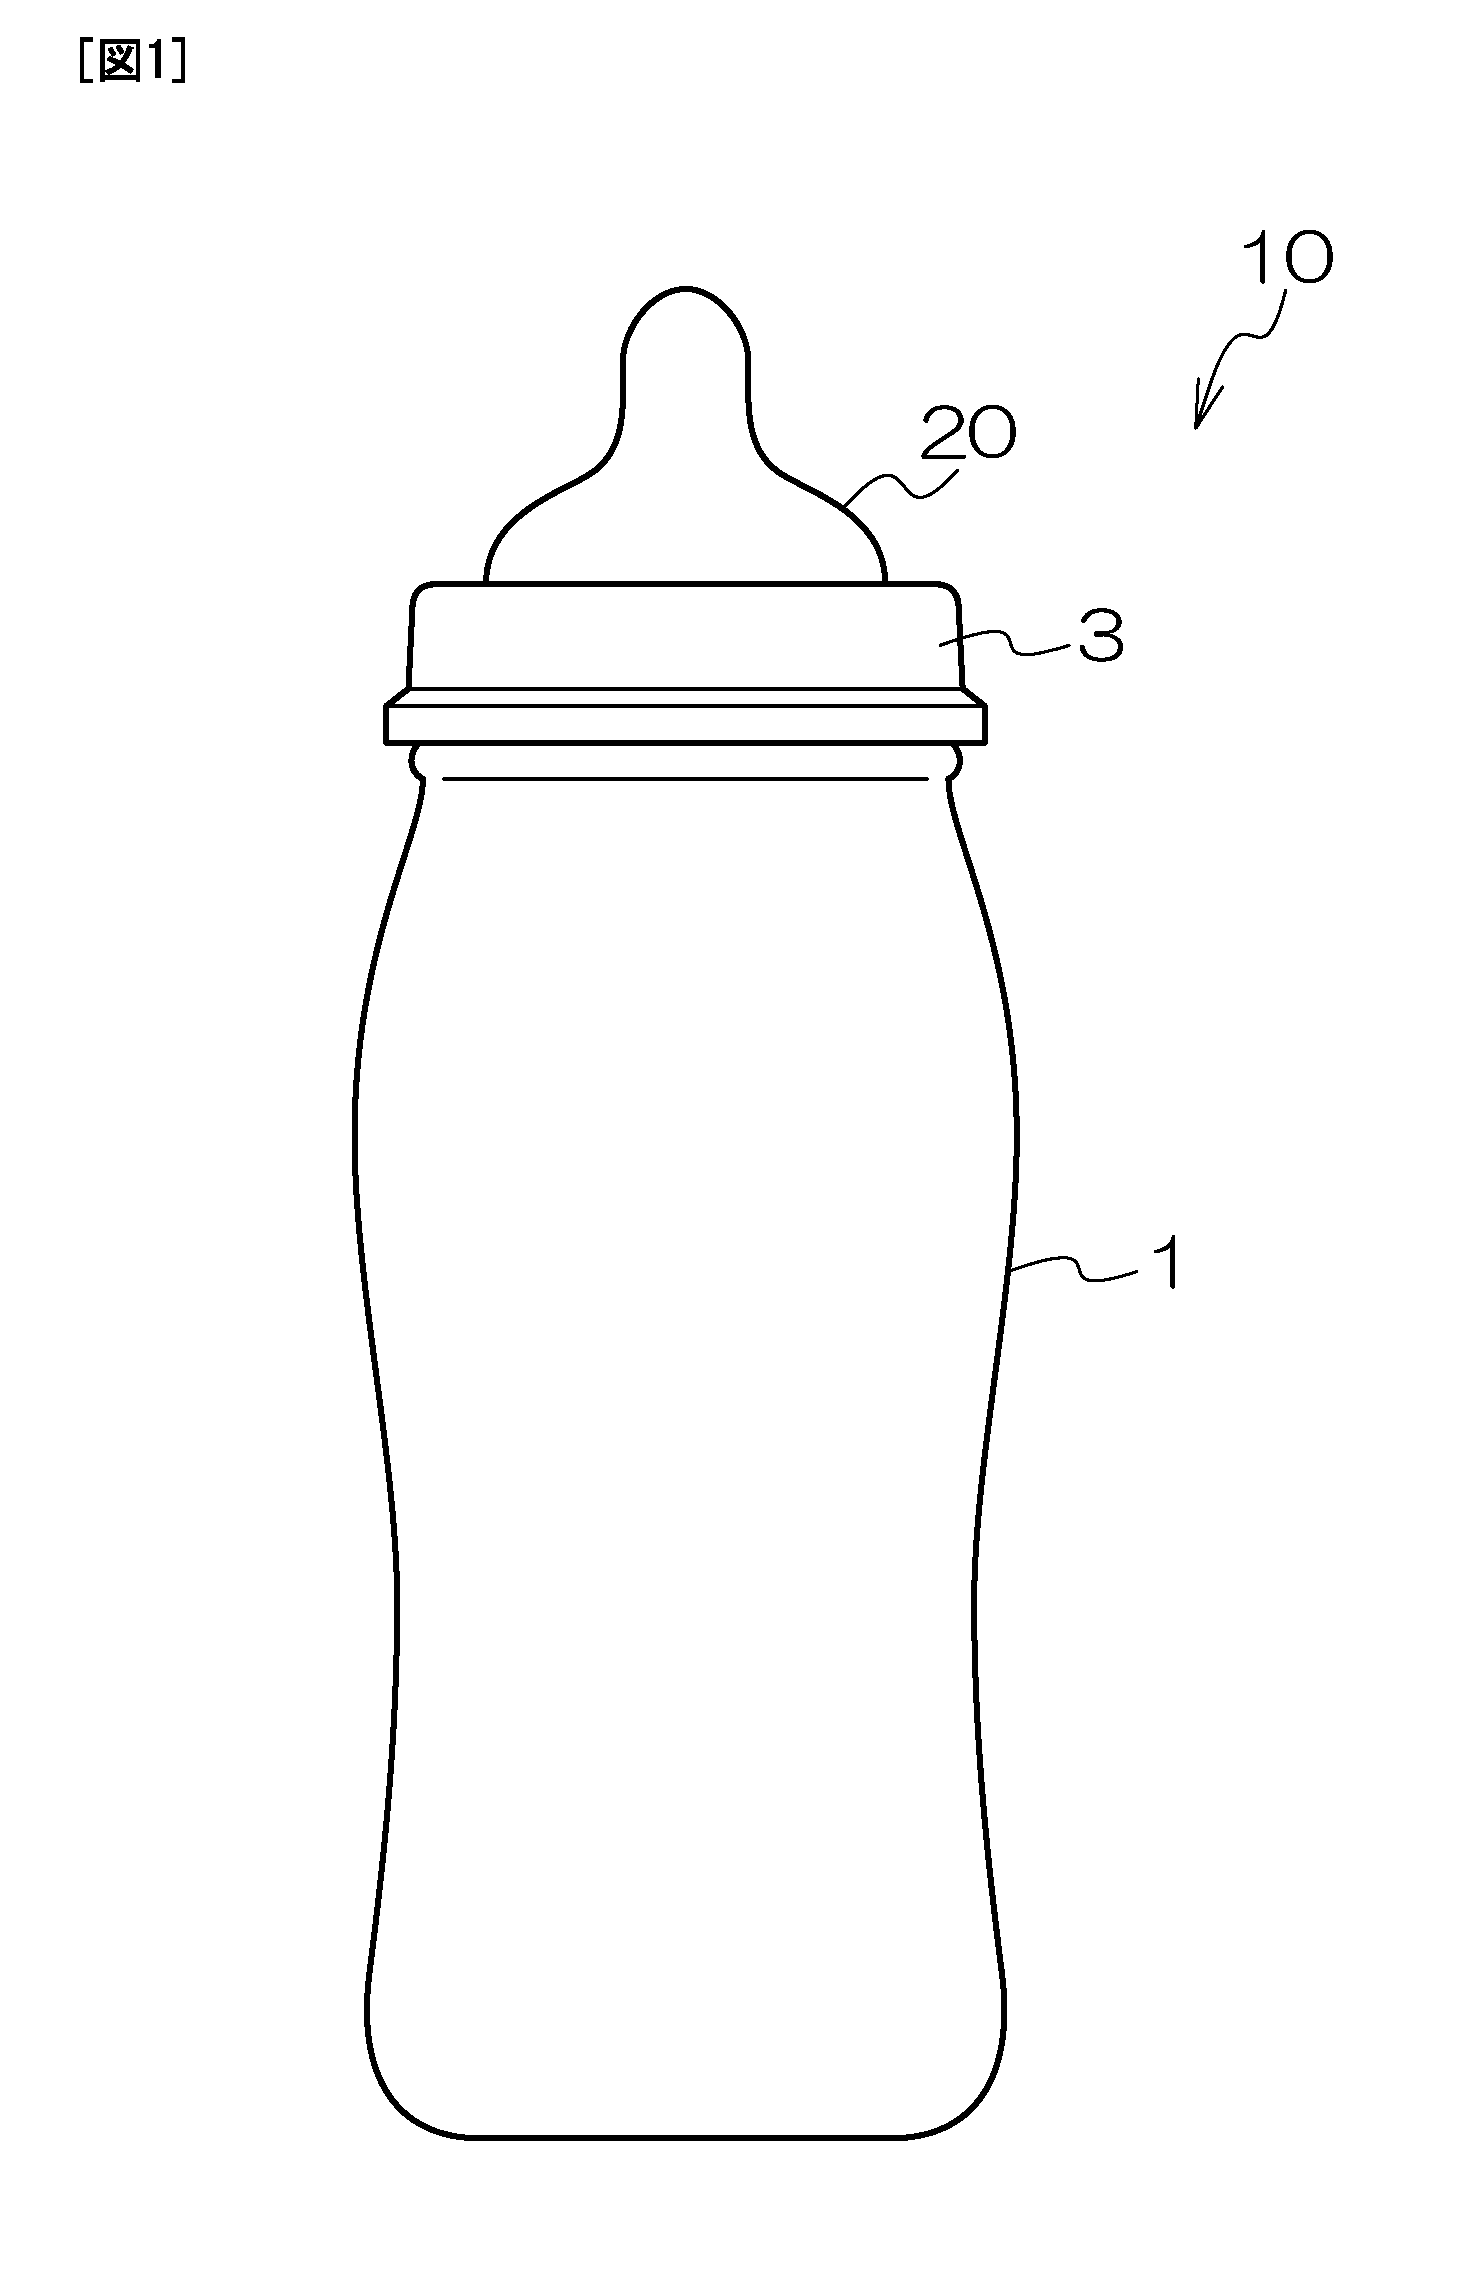 Artificial nipple and nursing container using same